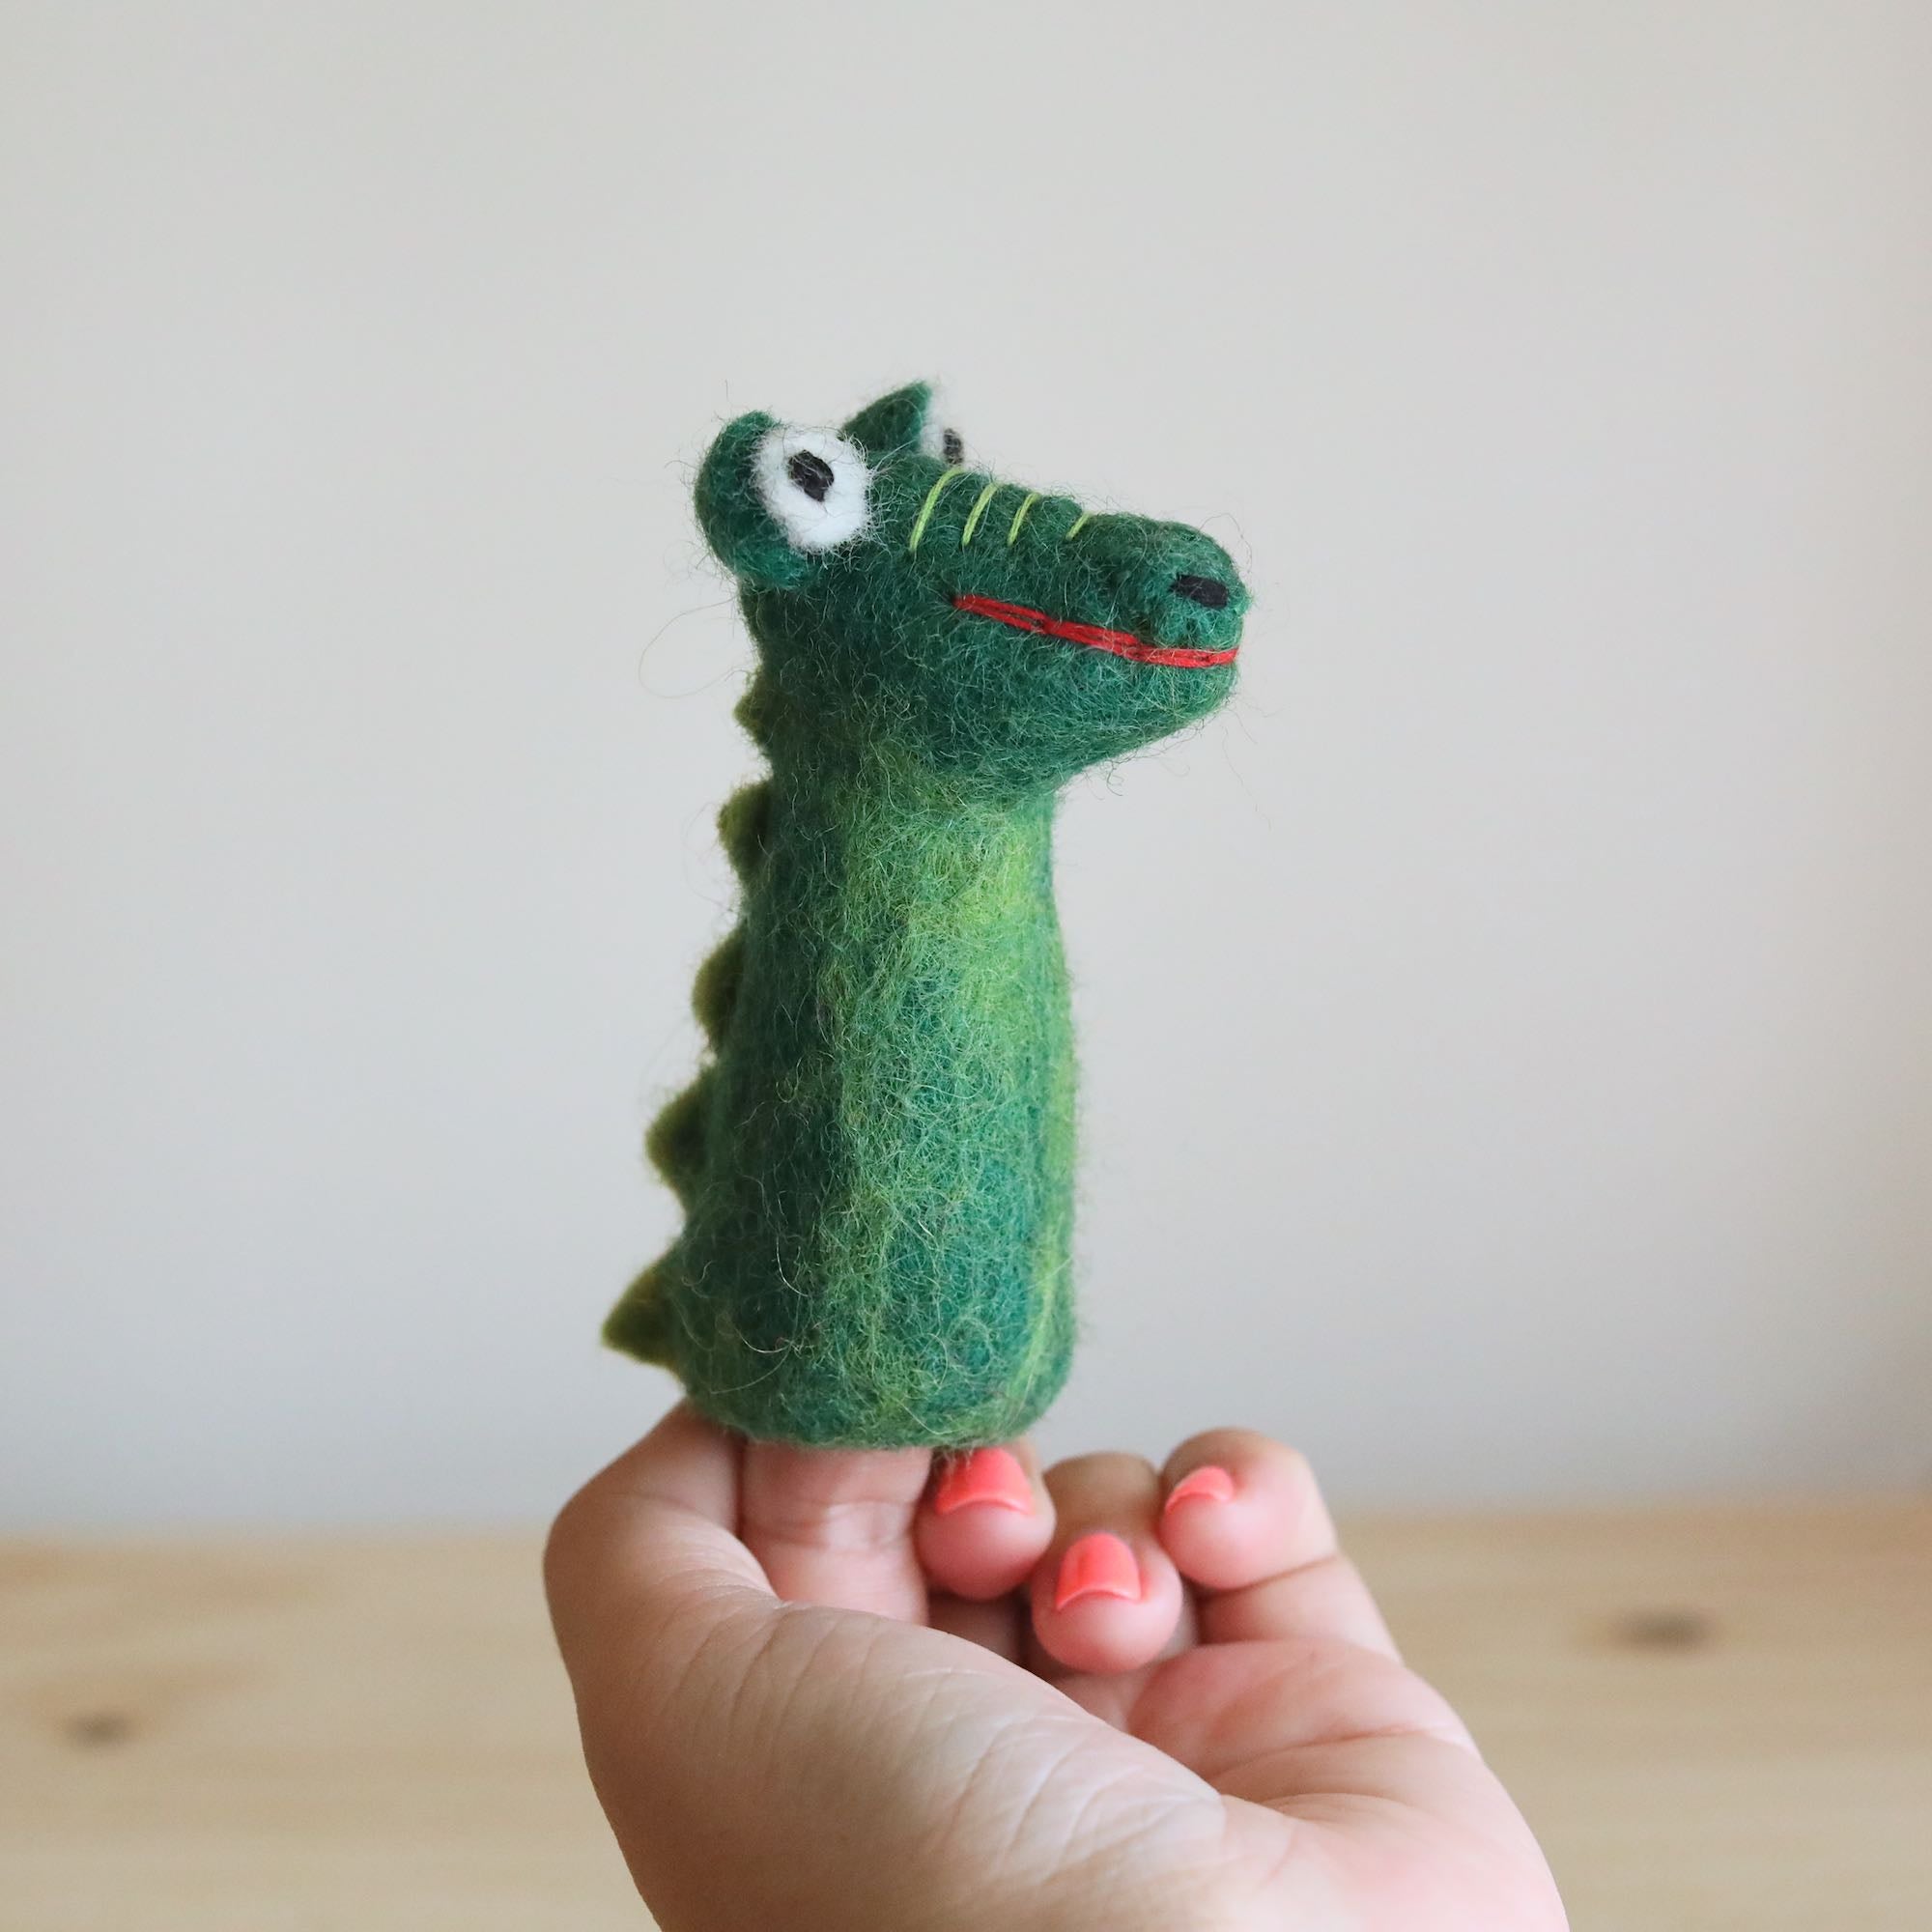 Felt Jungle Finger Puppets with the Cricut Maker - Housewife Eclectic